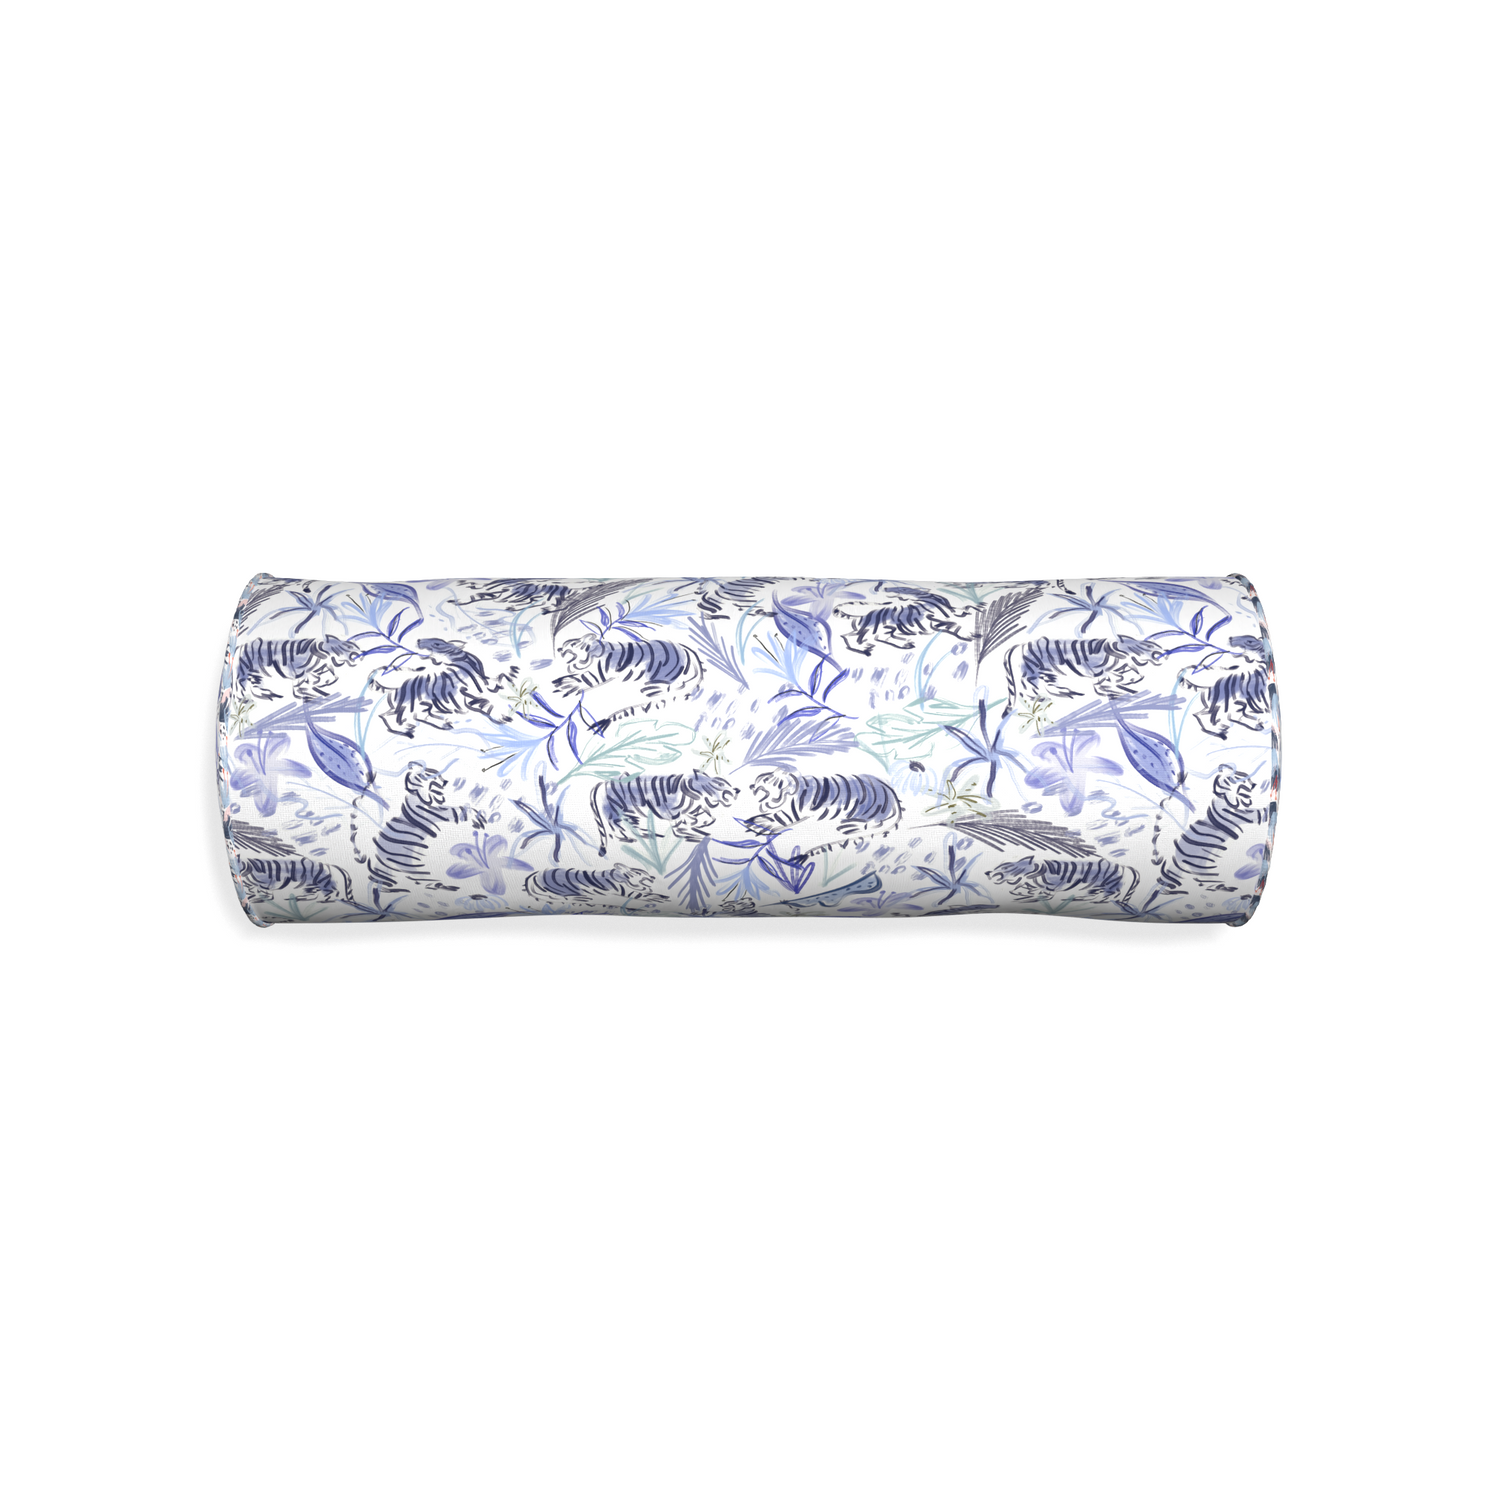 Bolster frida blue custom blue with intricate tiger designpillow with e piping on white background